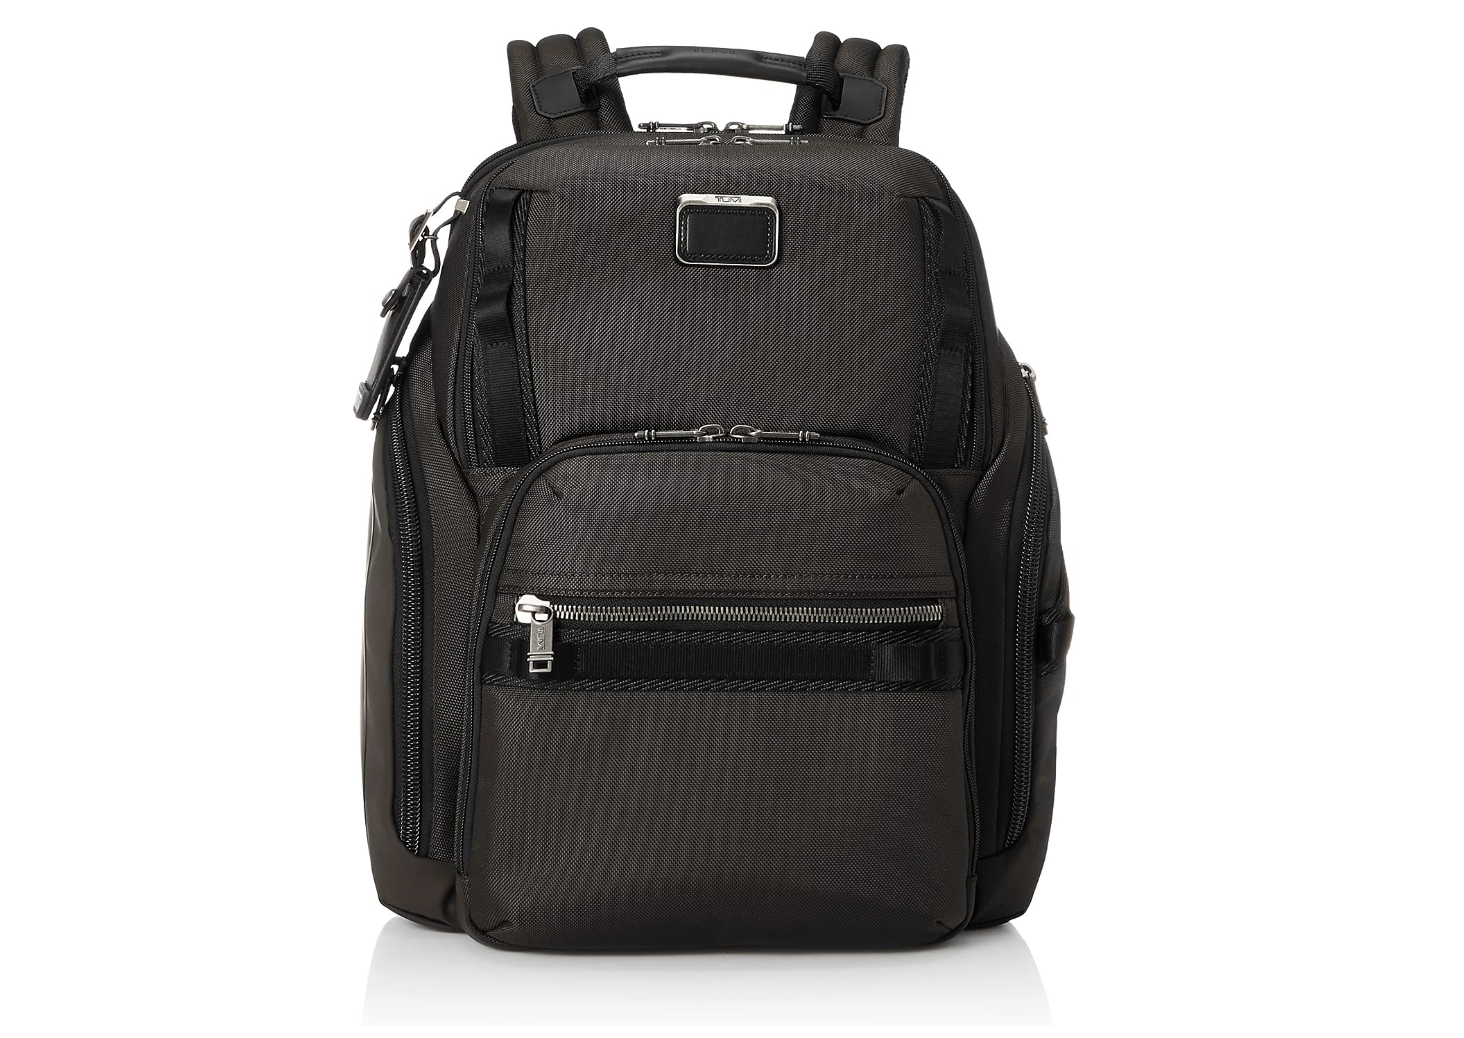 TUMI Search Backpack